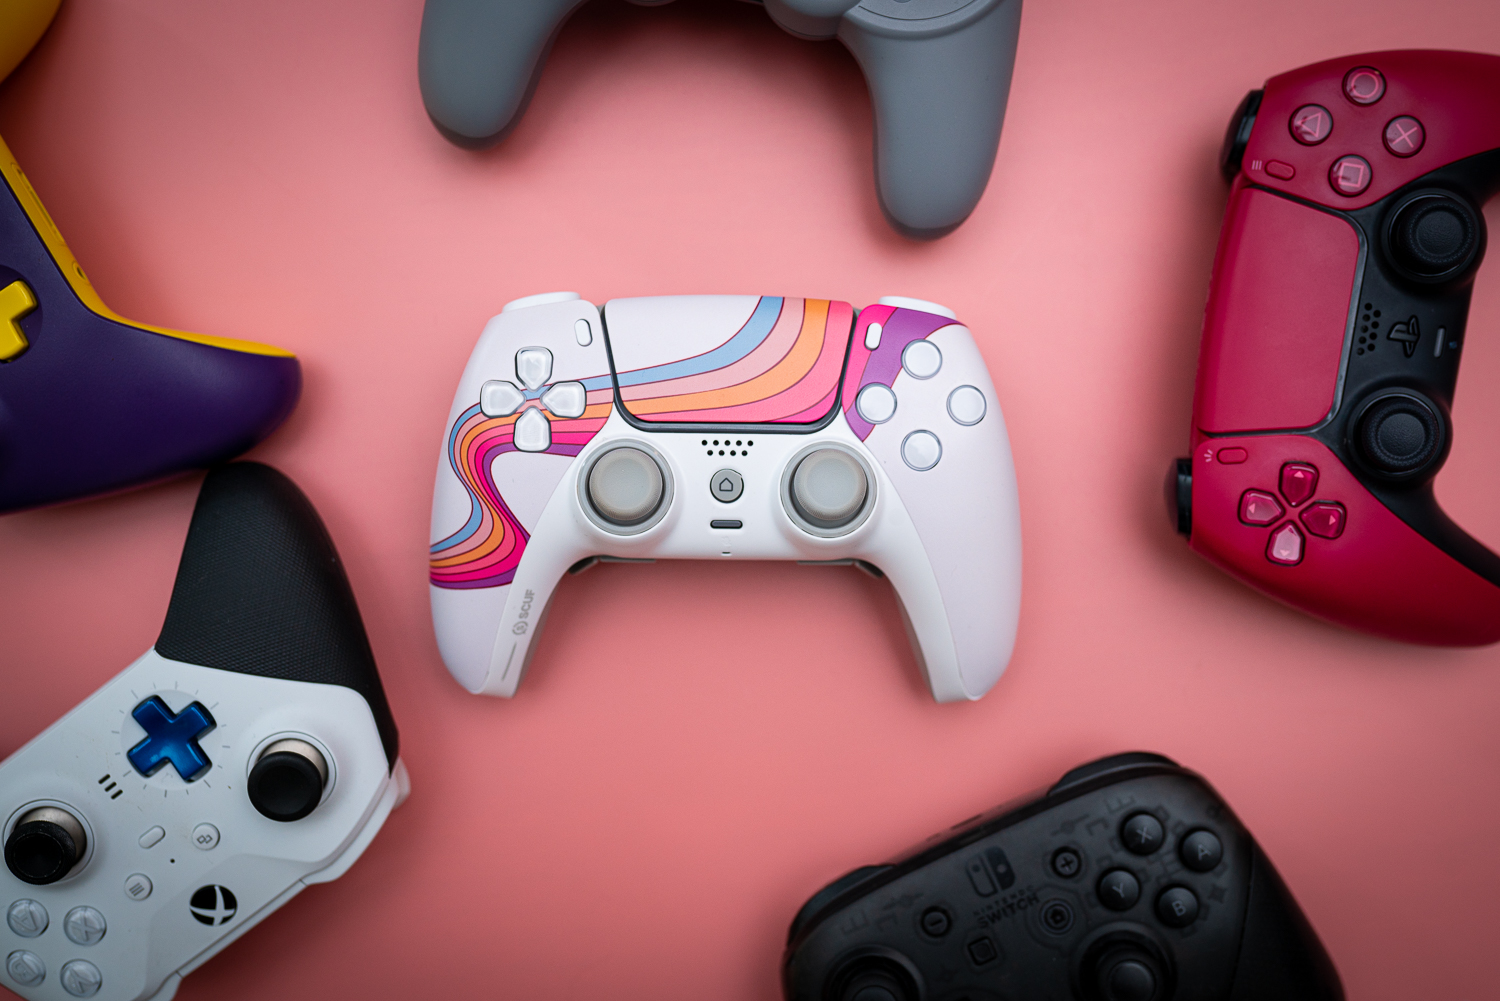 I've created some custom designs for last gen controllers